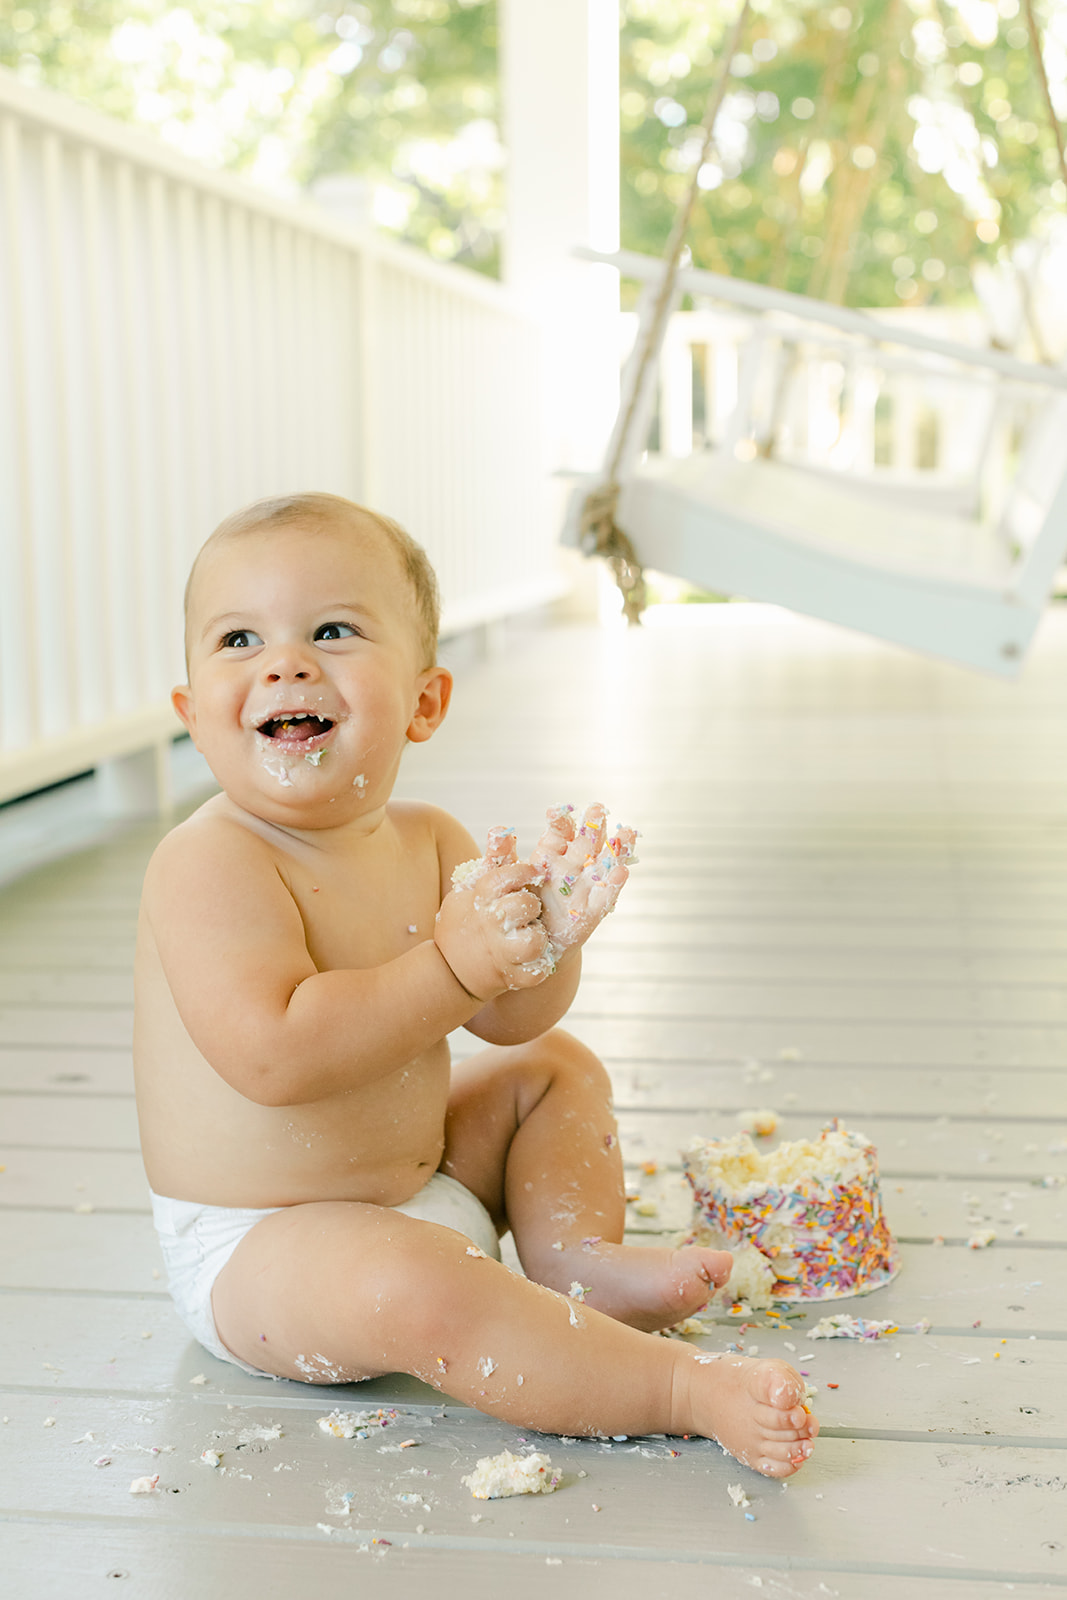 1 year milestone session for baby boy. Cozy at home session. Cake smash session